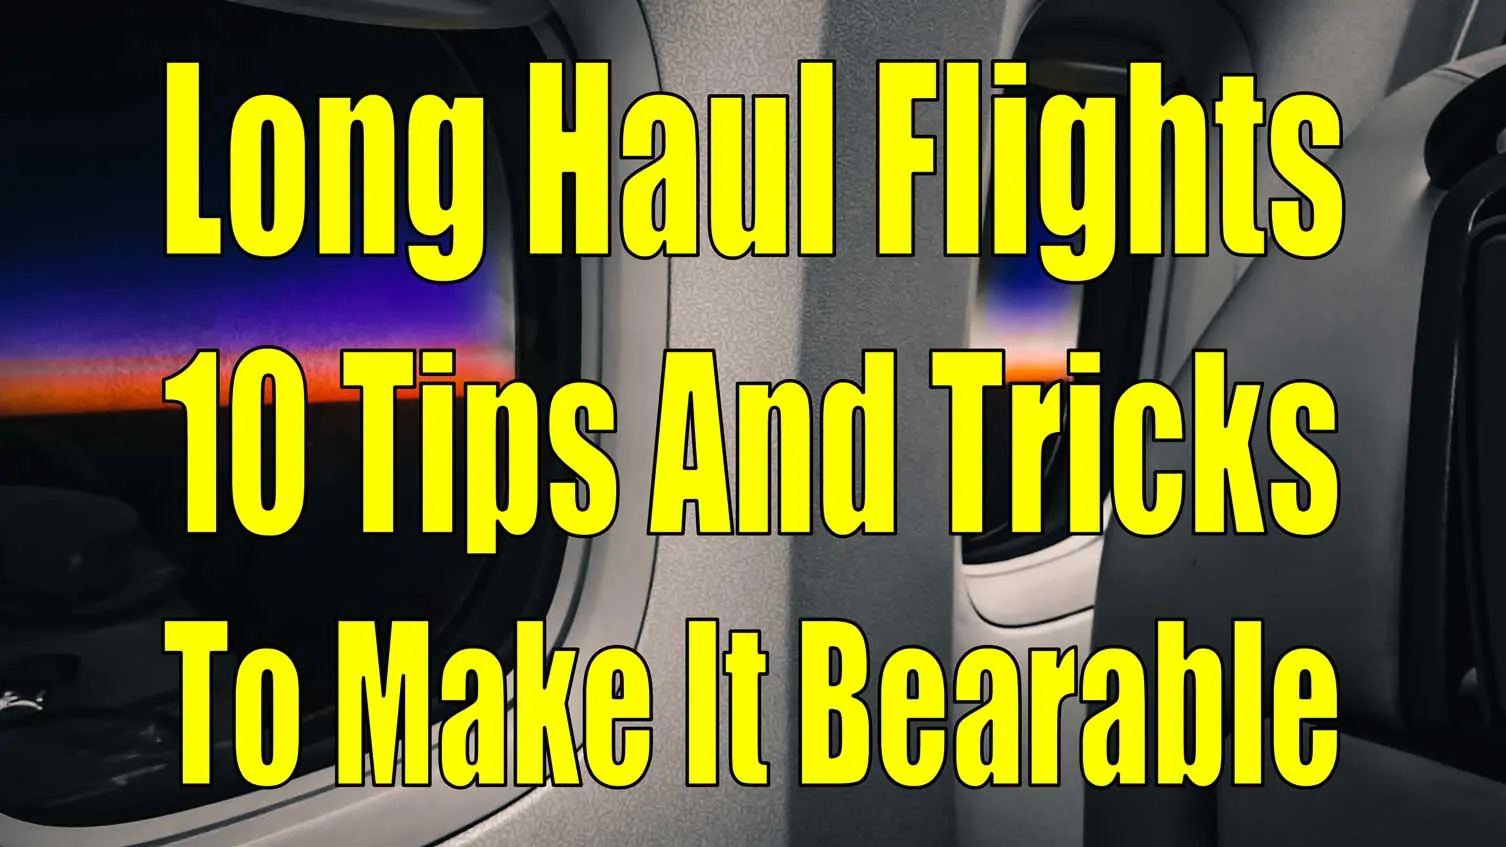 10 long haul flight tips and tricks to make it bearable